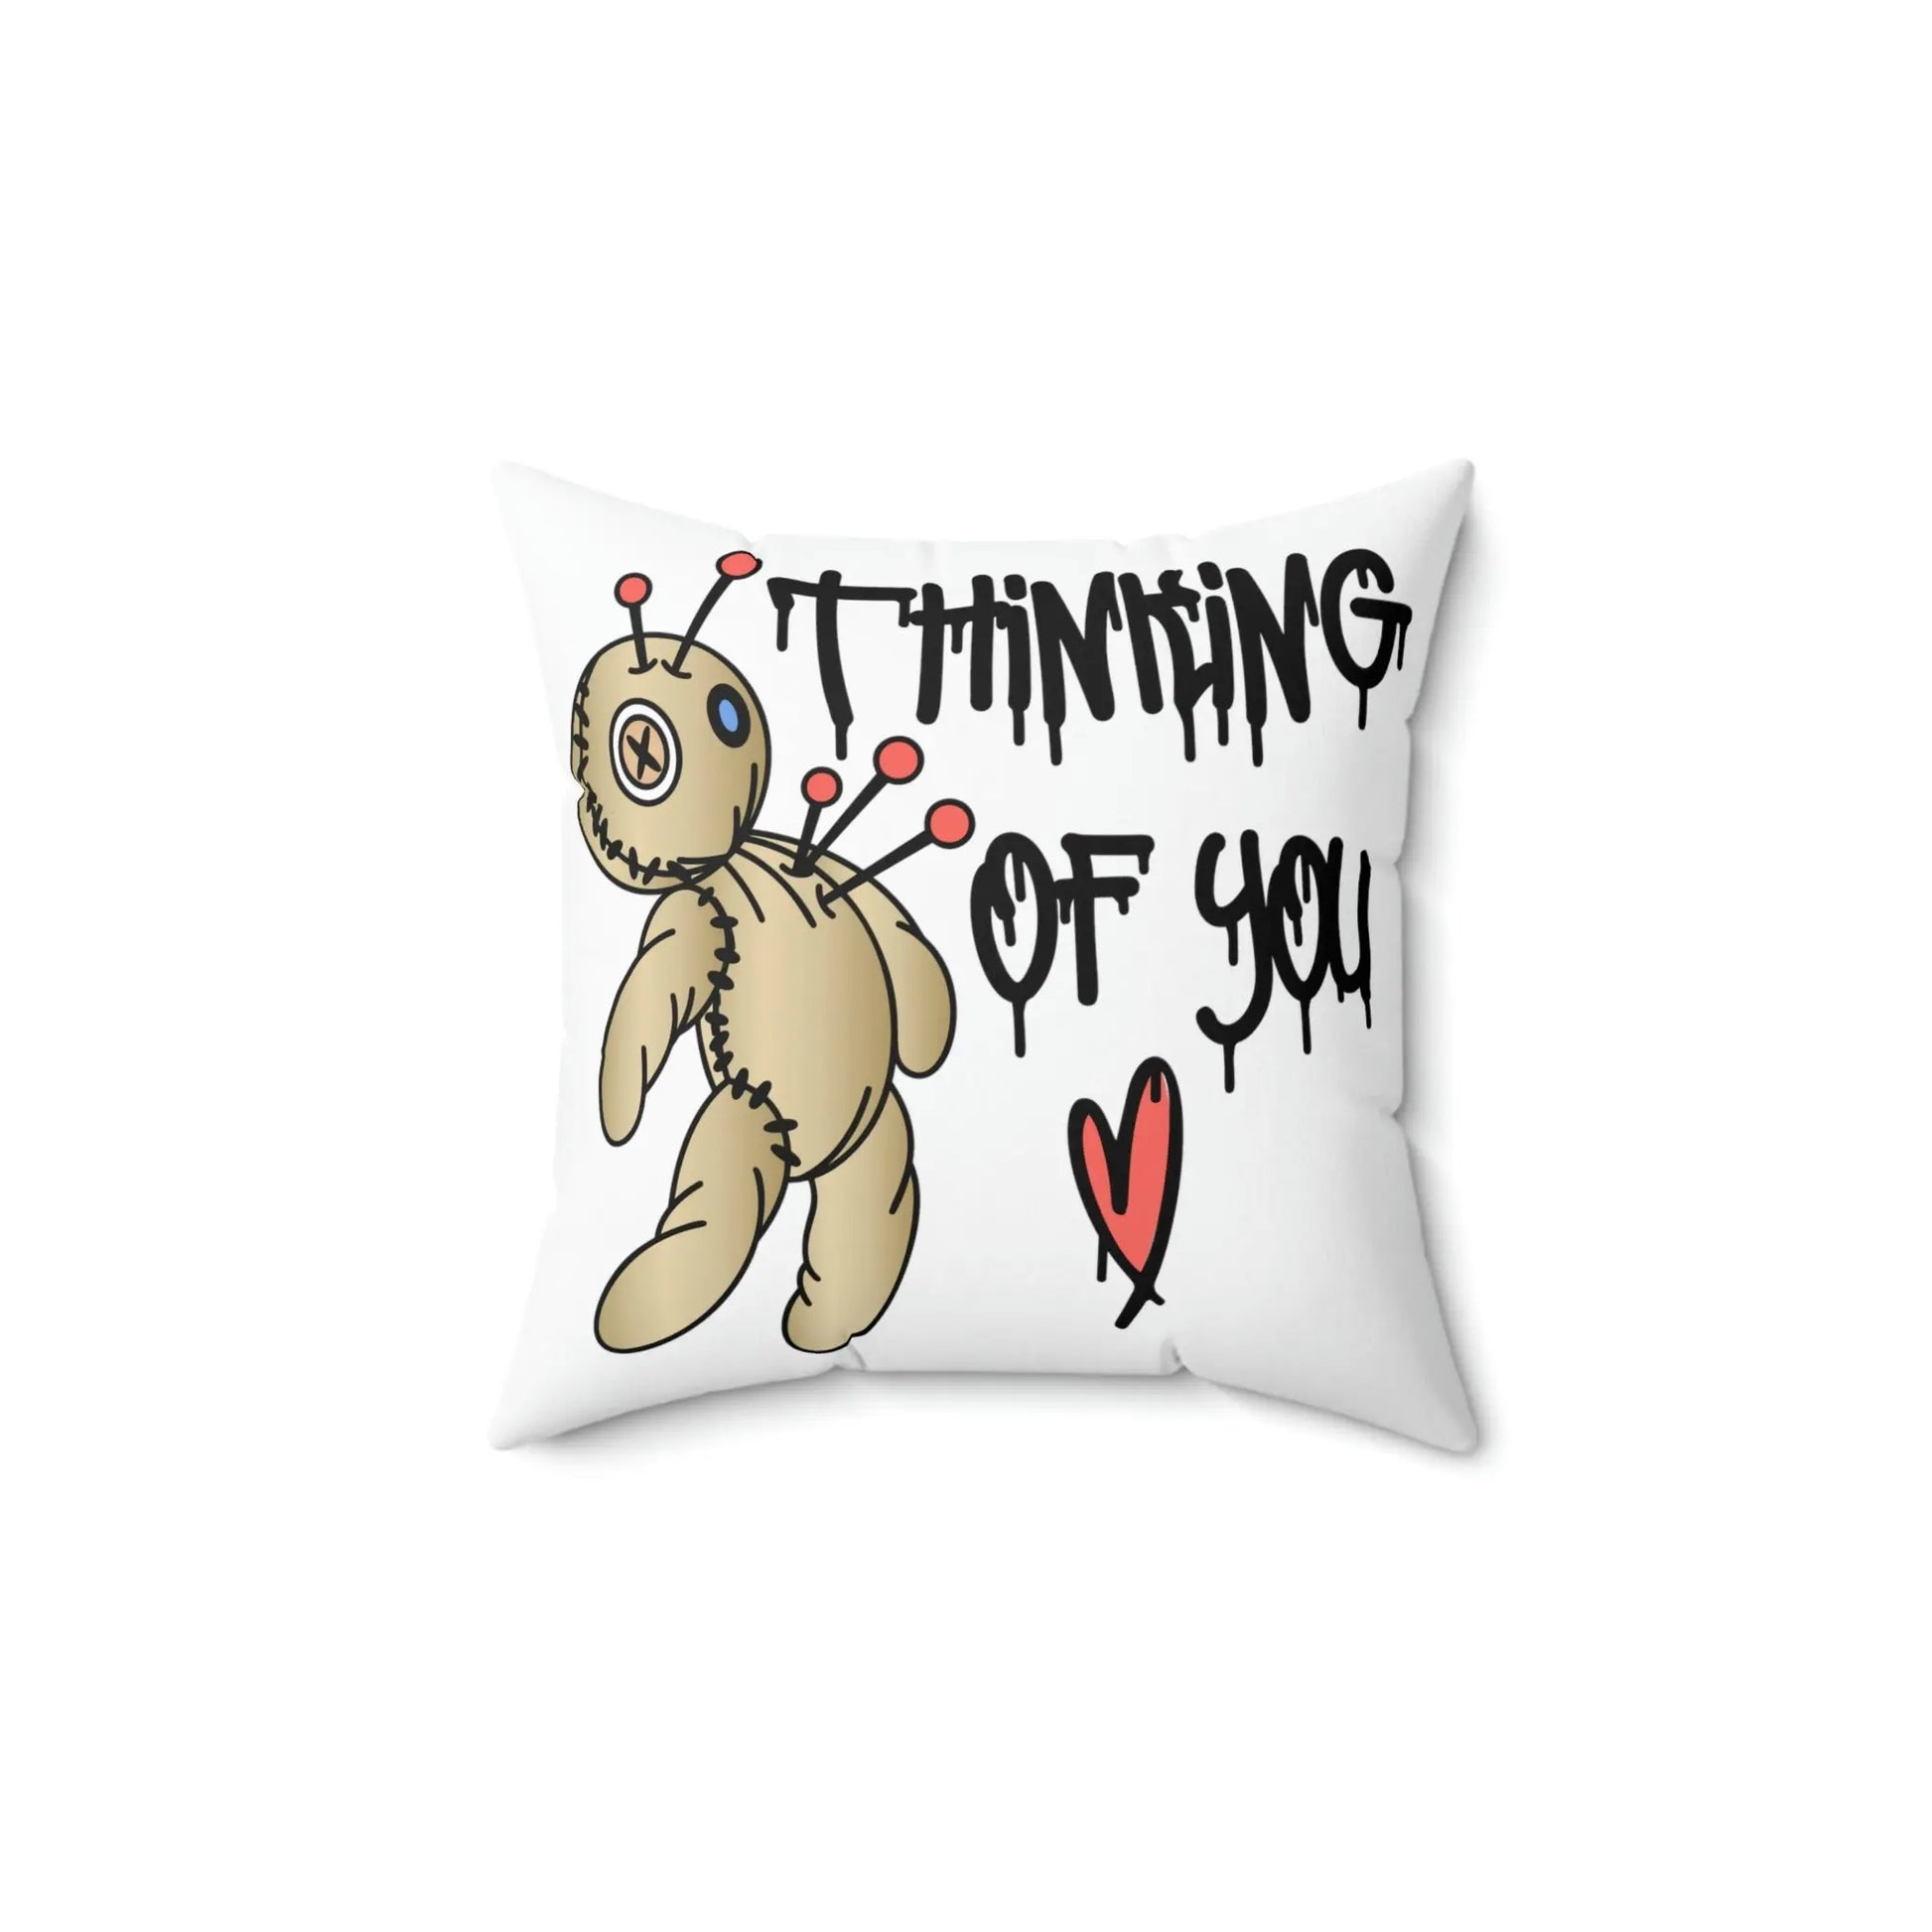 Thinking Of You Voodoo Pillow 14" × 14"